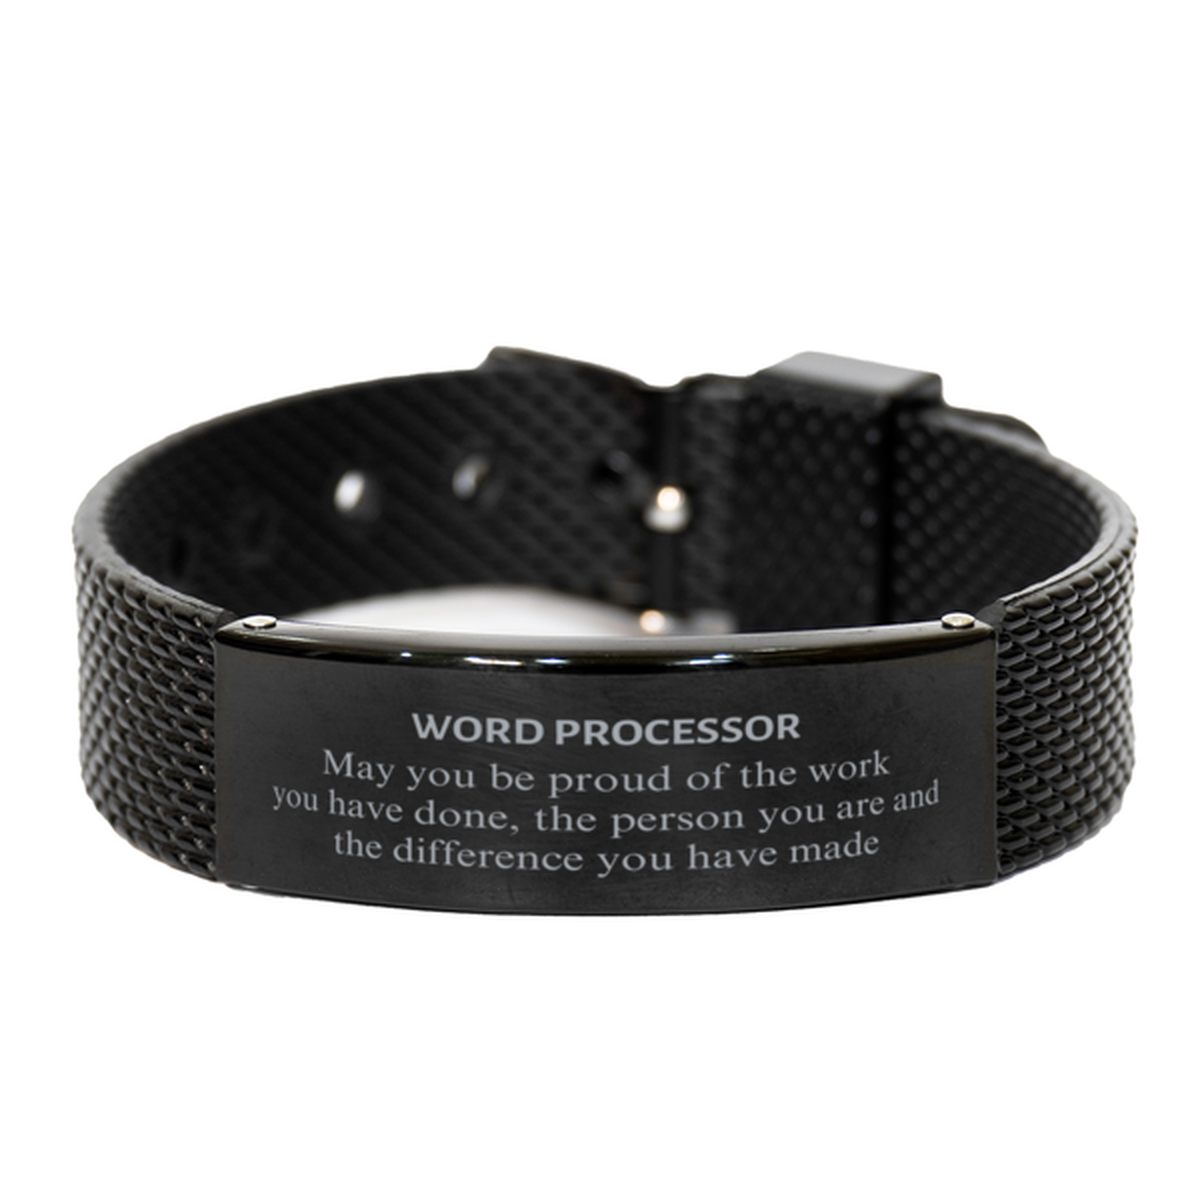 Word Processor May you be proud of the work you have done, Retirement Word Processor Black Shark Mesh Bracelet for Colleague Appreciation Gifts Amazing for Word Processor